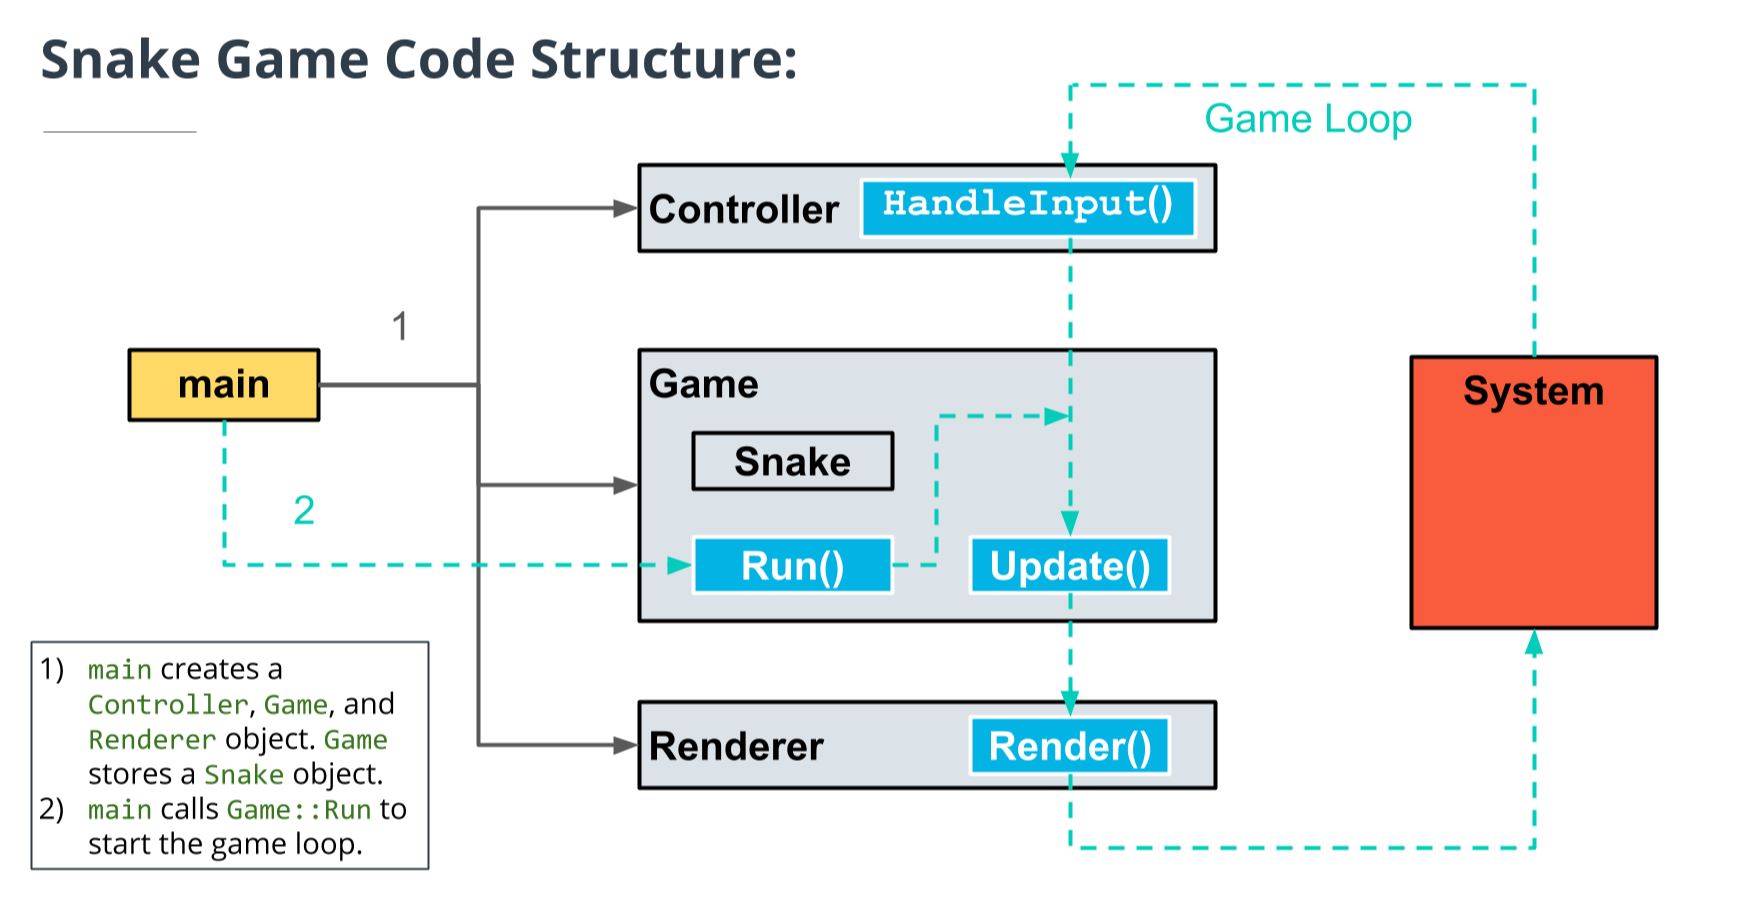 Snake Game Code Structure